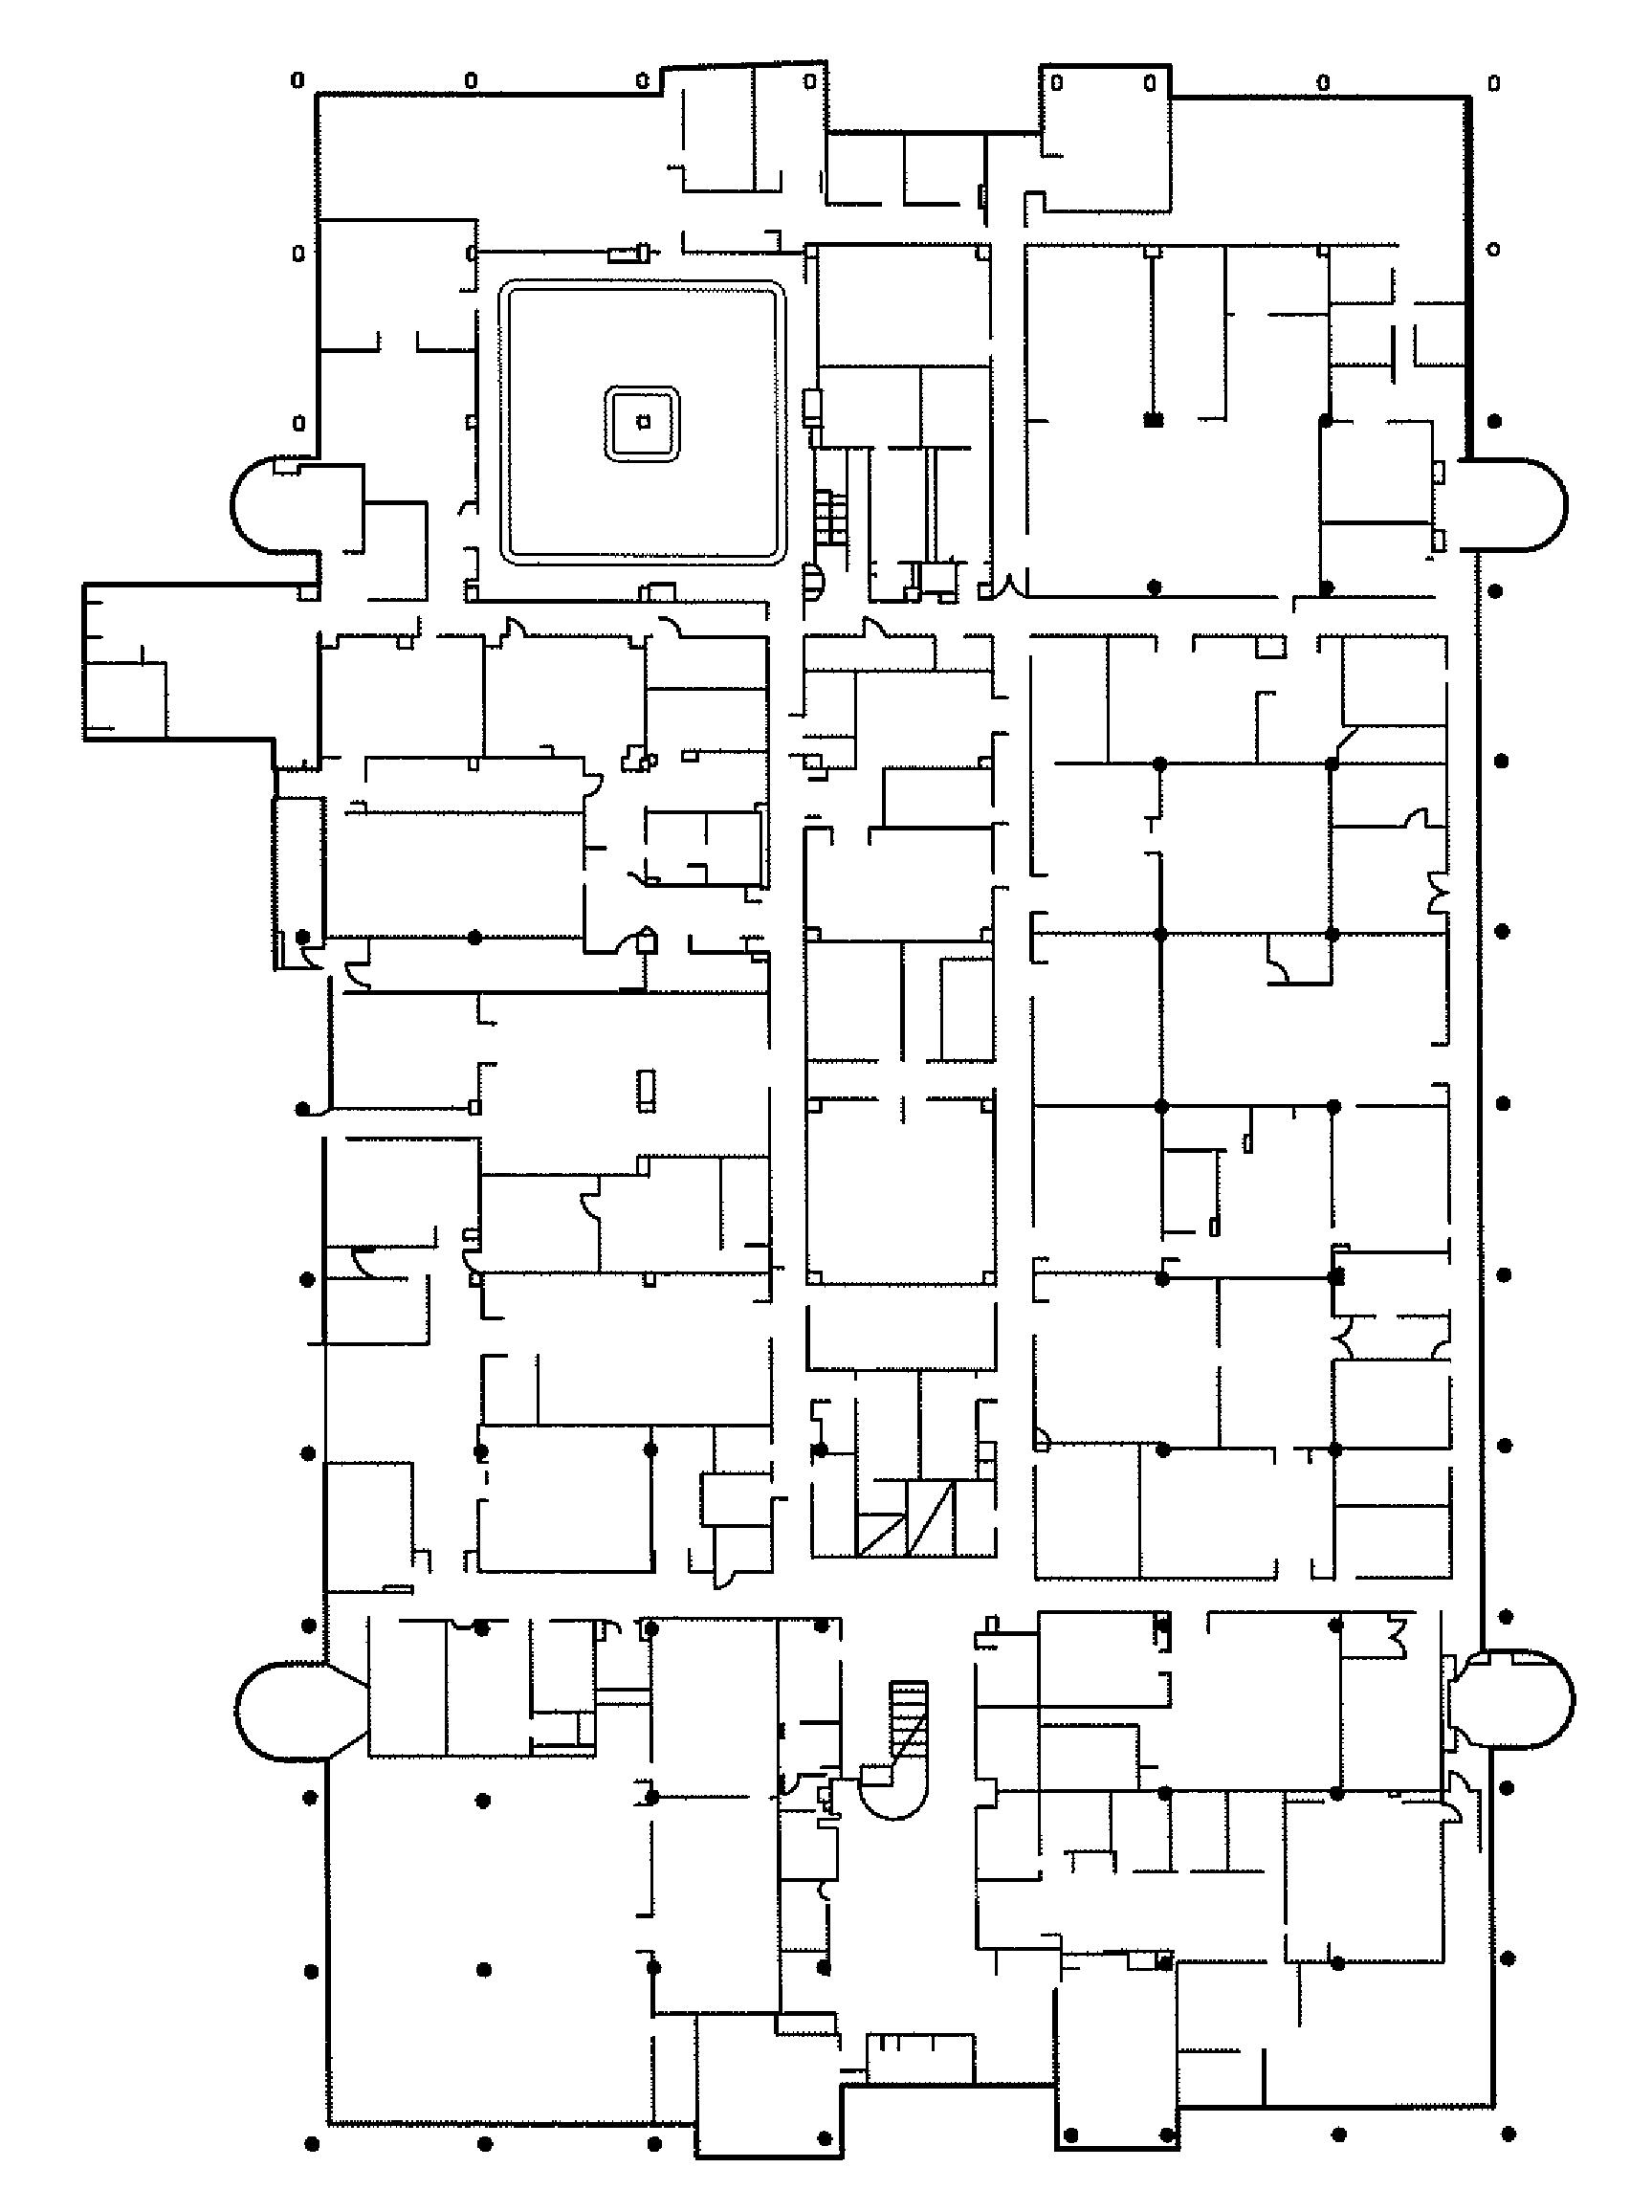 Method for generating 3D building models from a set of floor plans